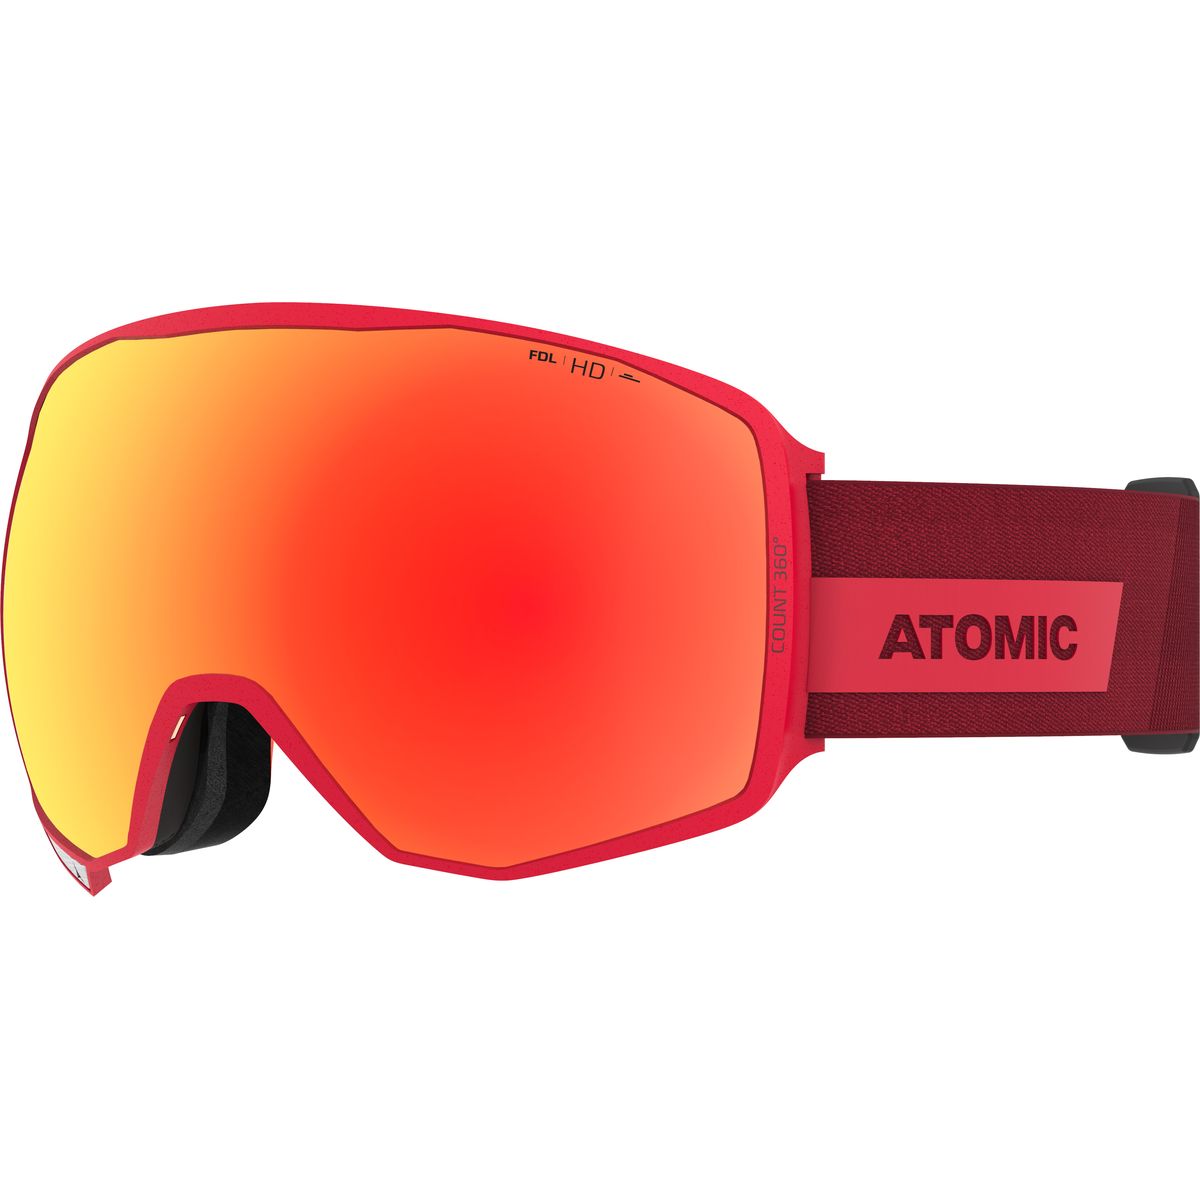 Atomic Count 360° Hd Skibrille